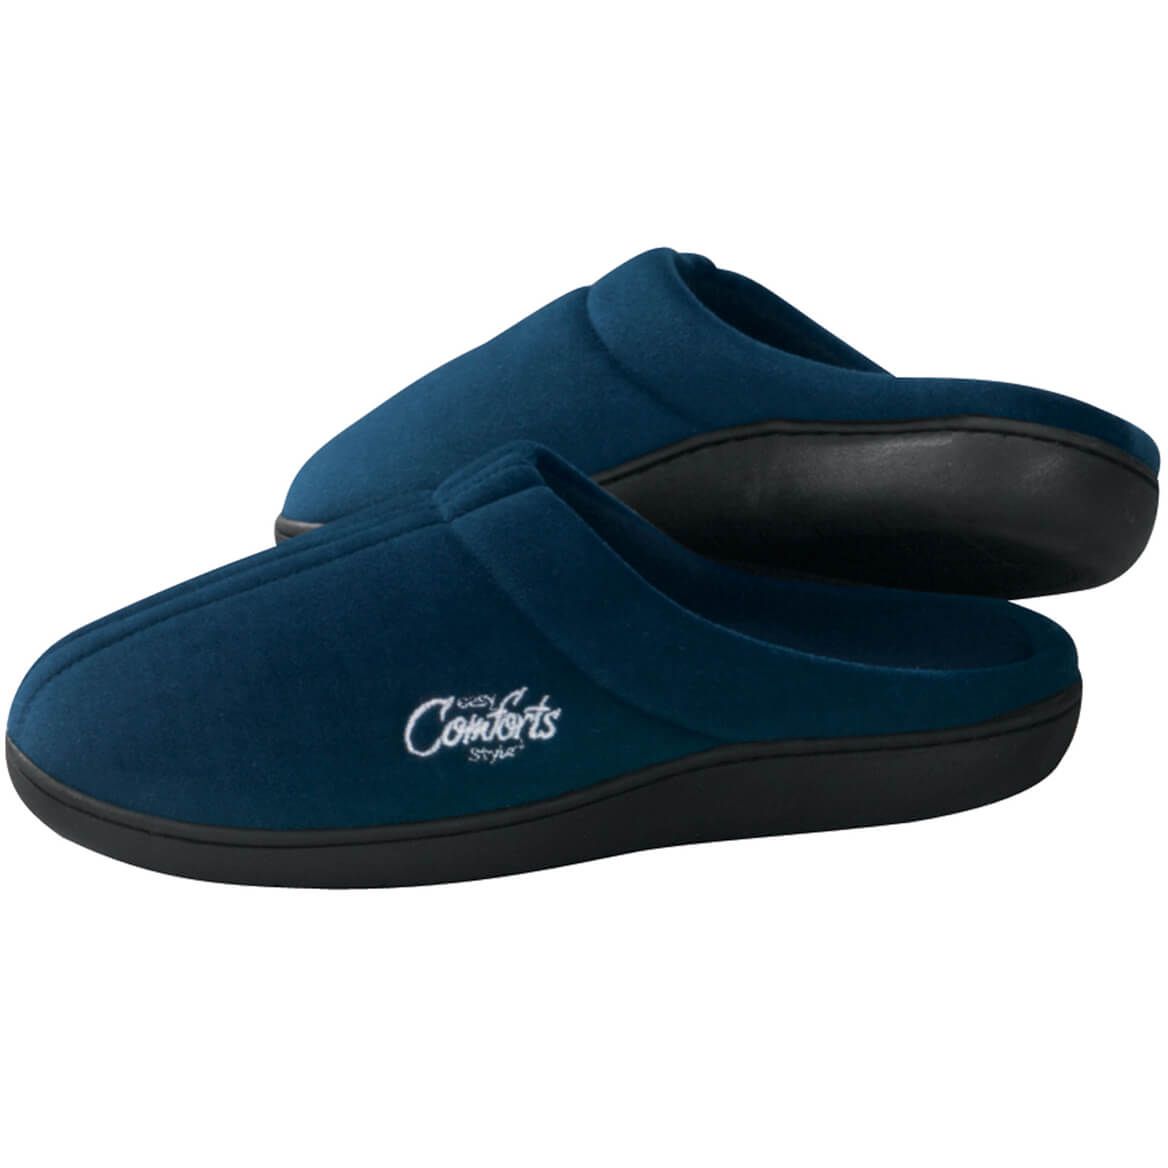 Easy Comforts Style™ Memory Foam Slippers + '-' + 343708